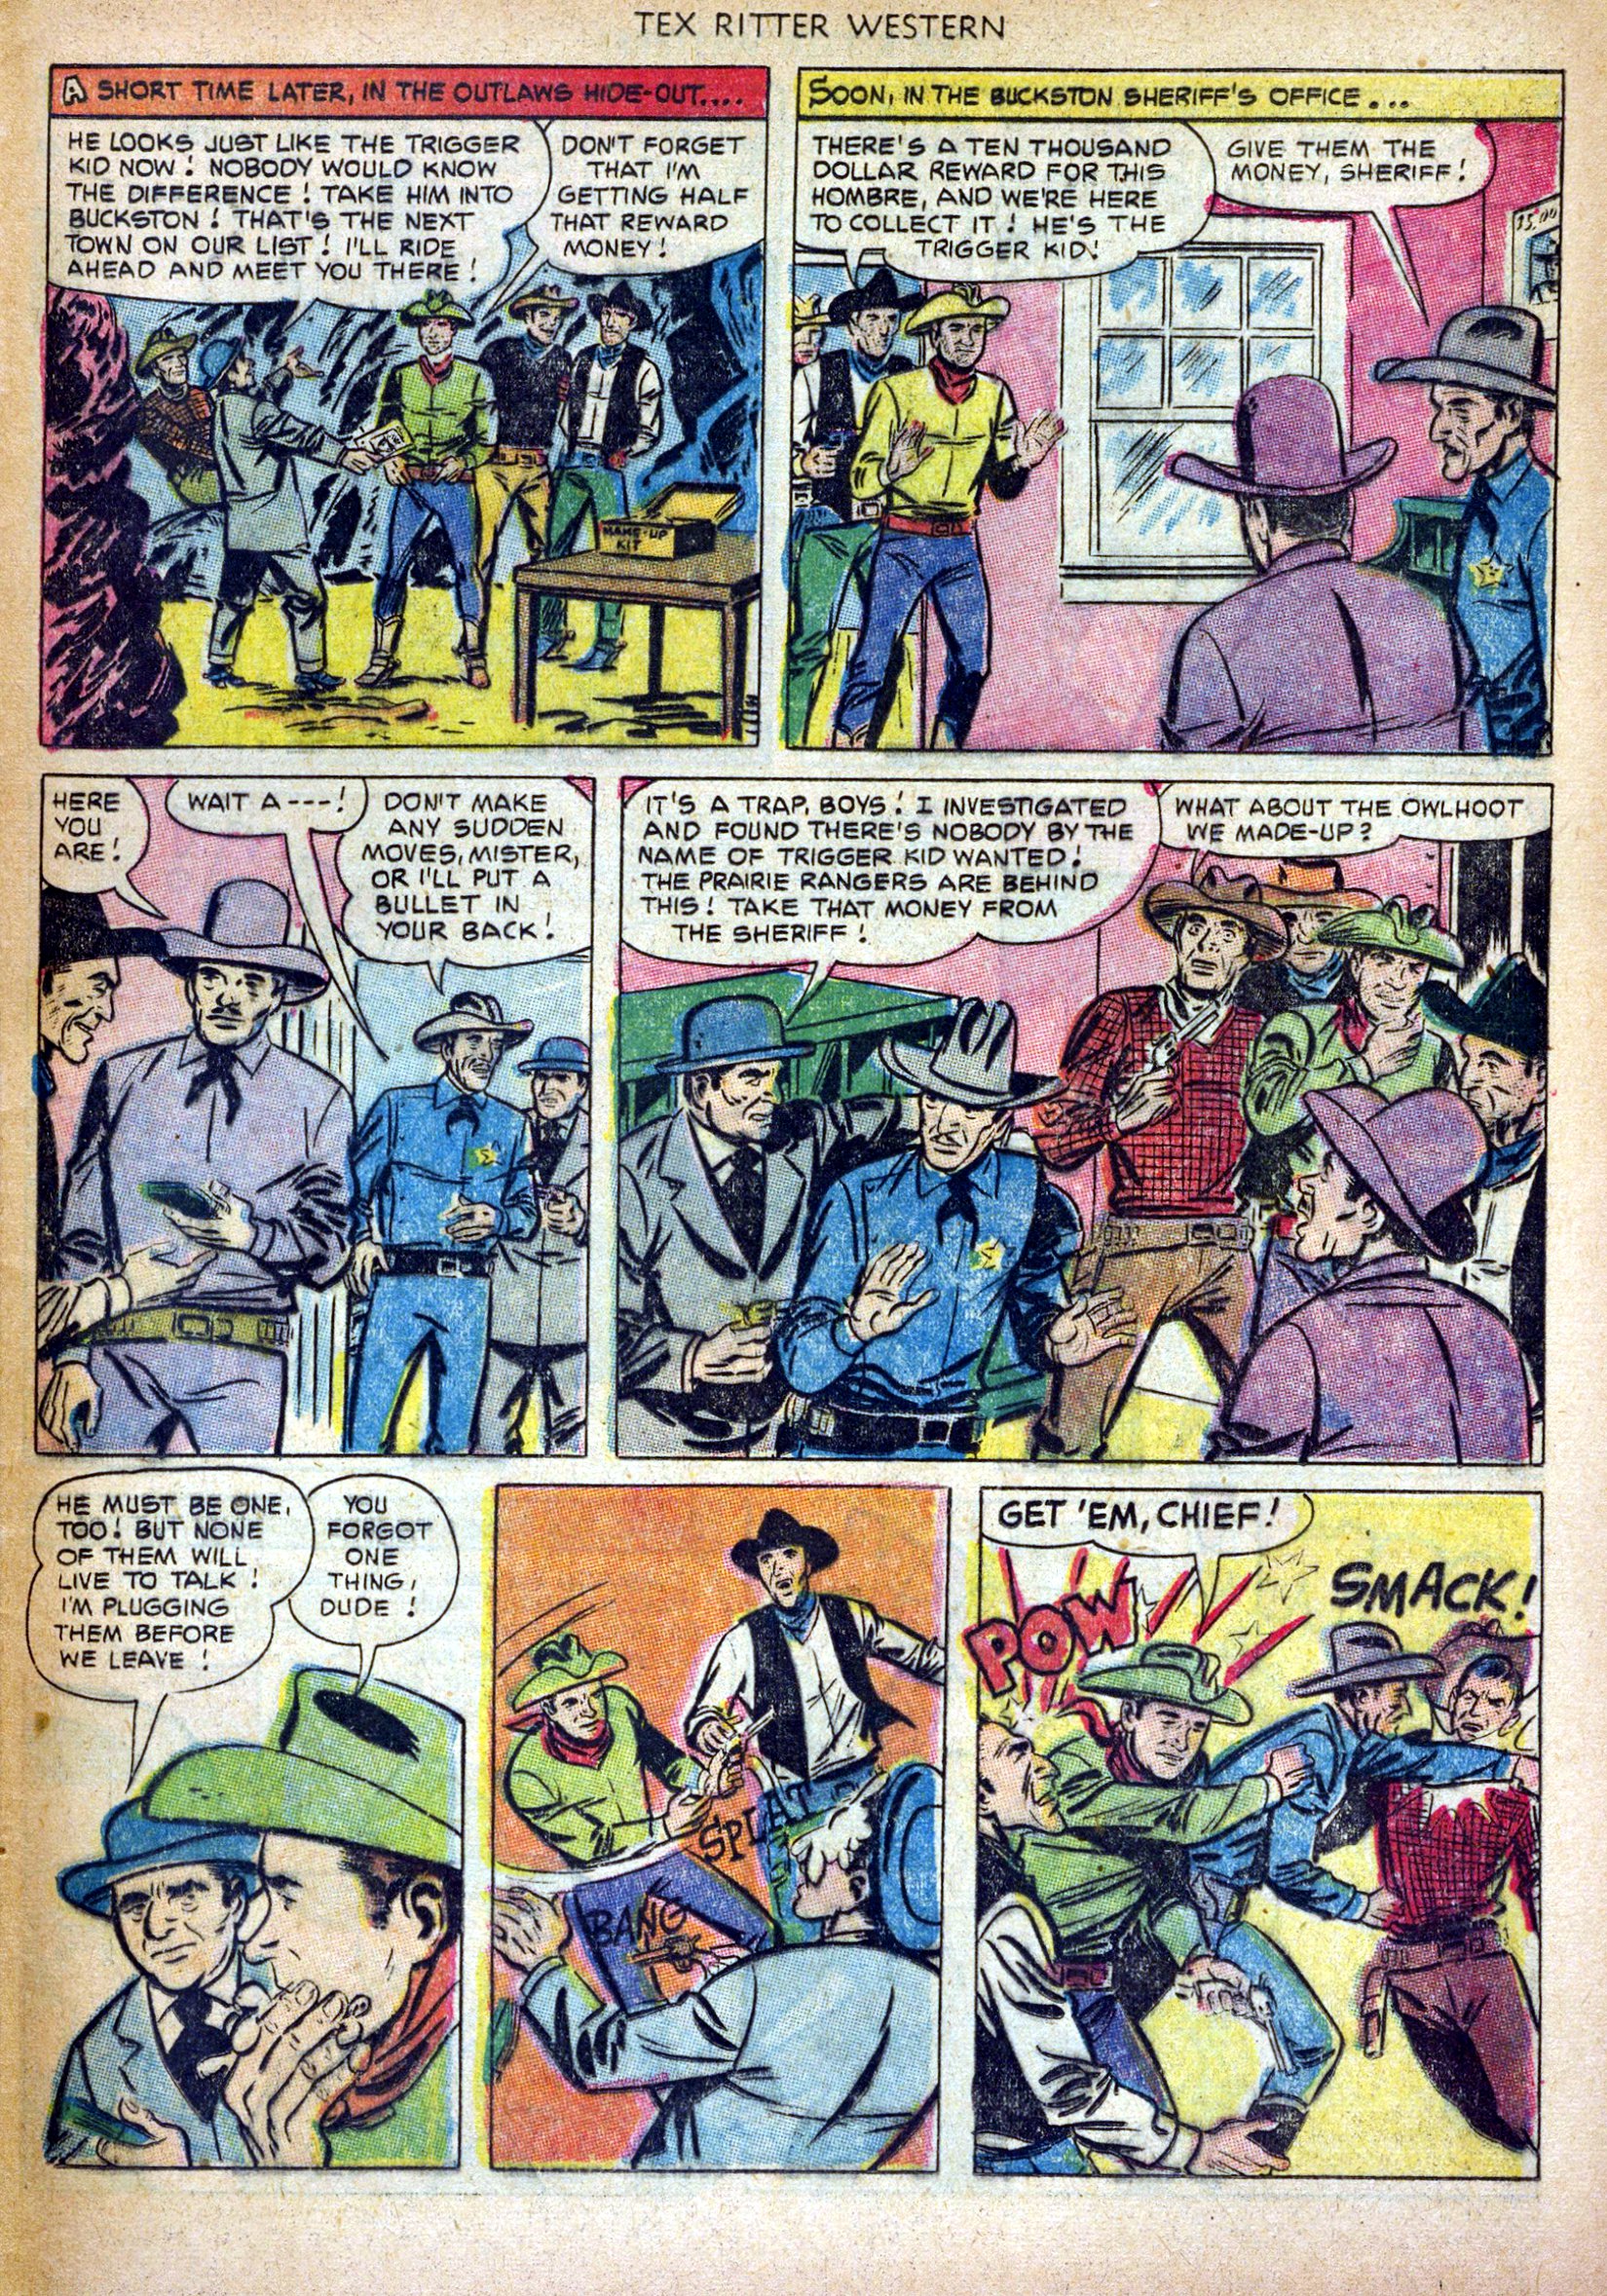 Read online Tex Ritter Western comic -  Issue #14 - 33